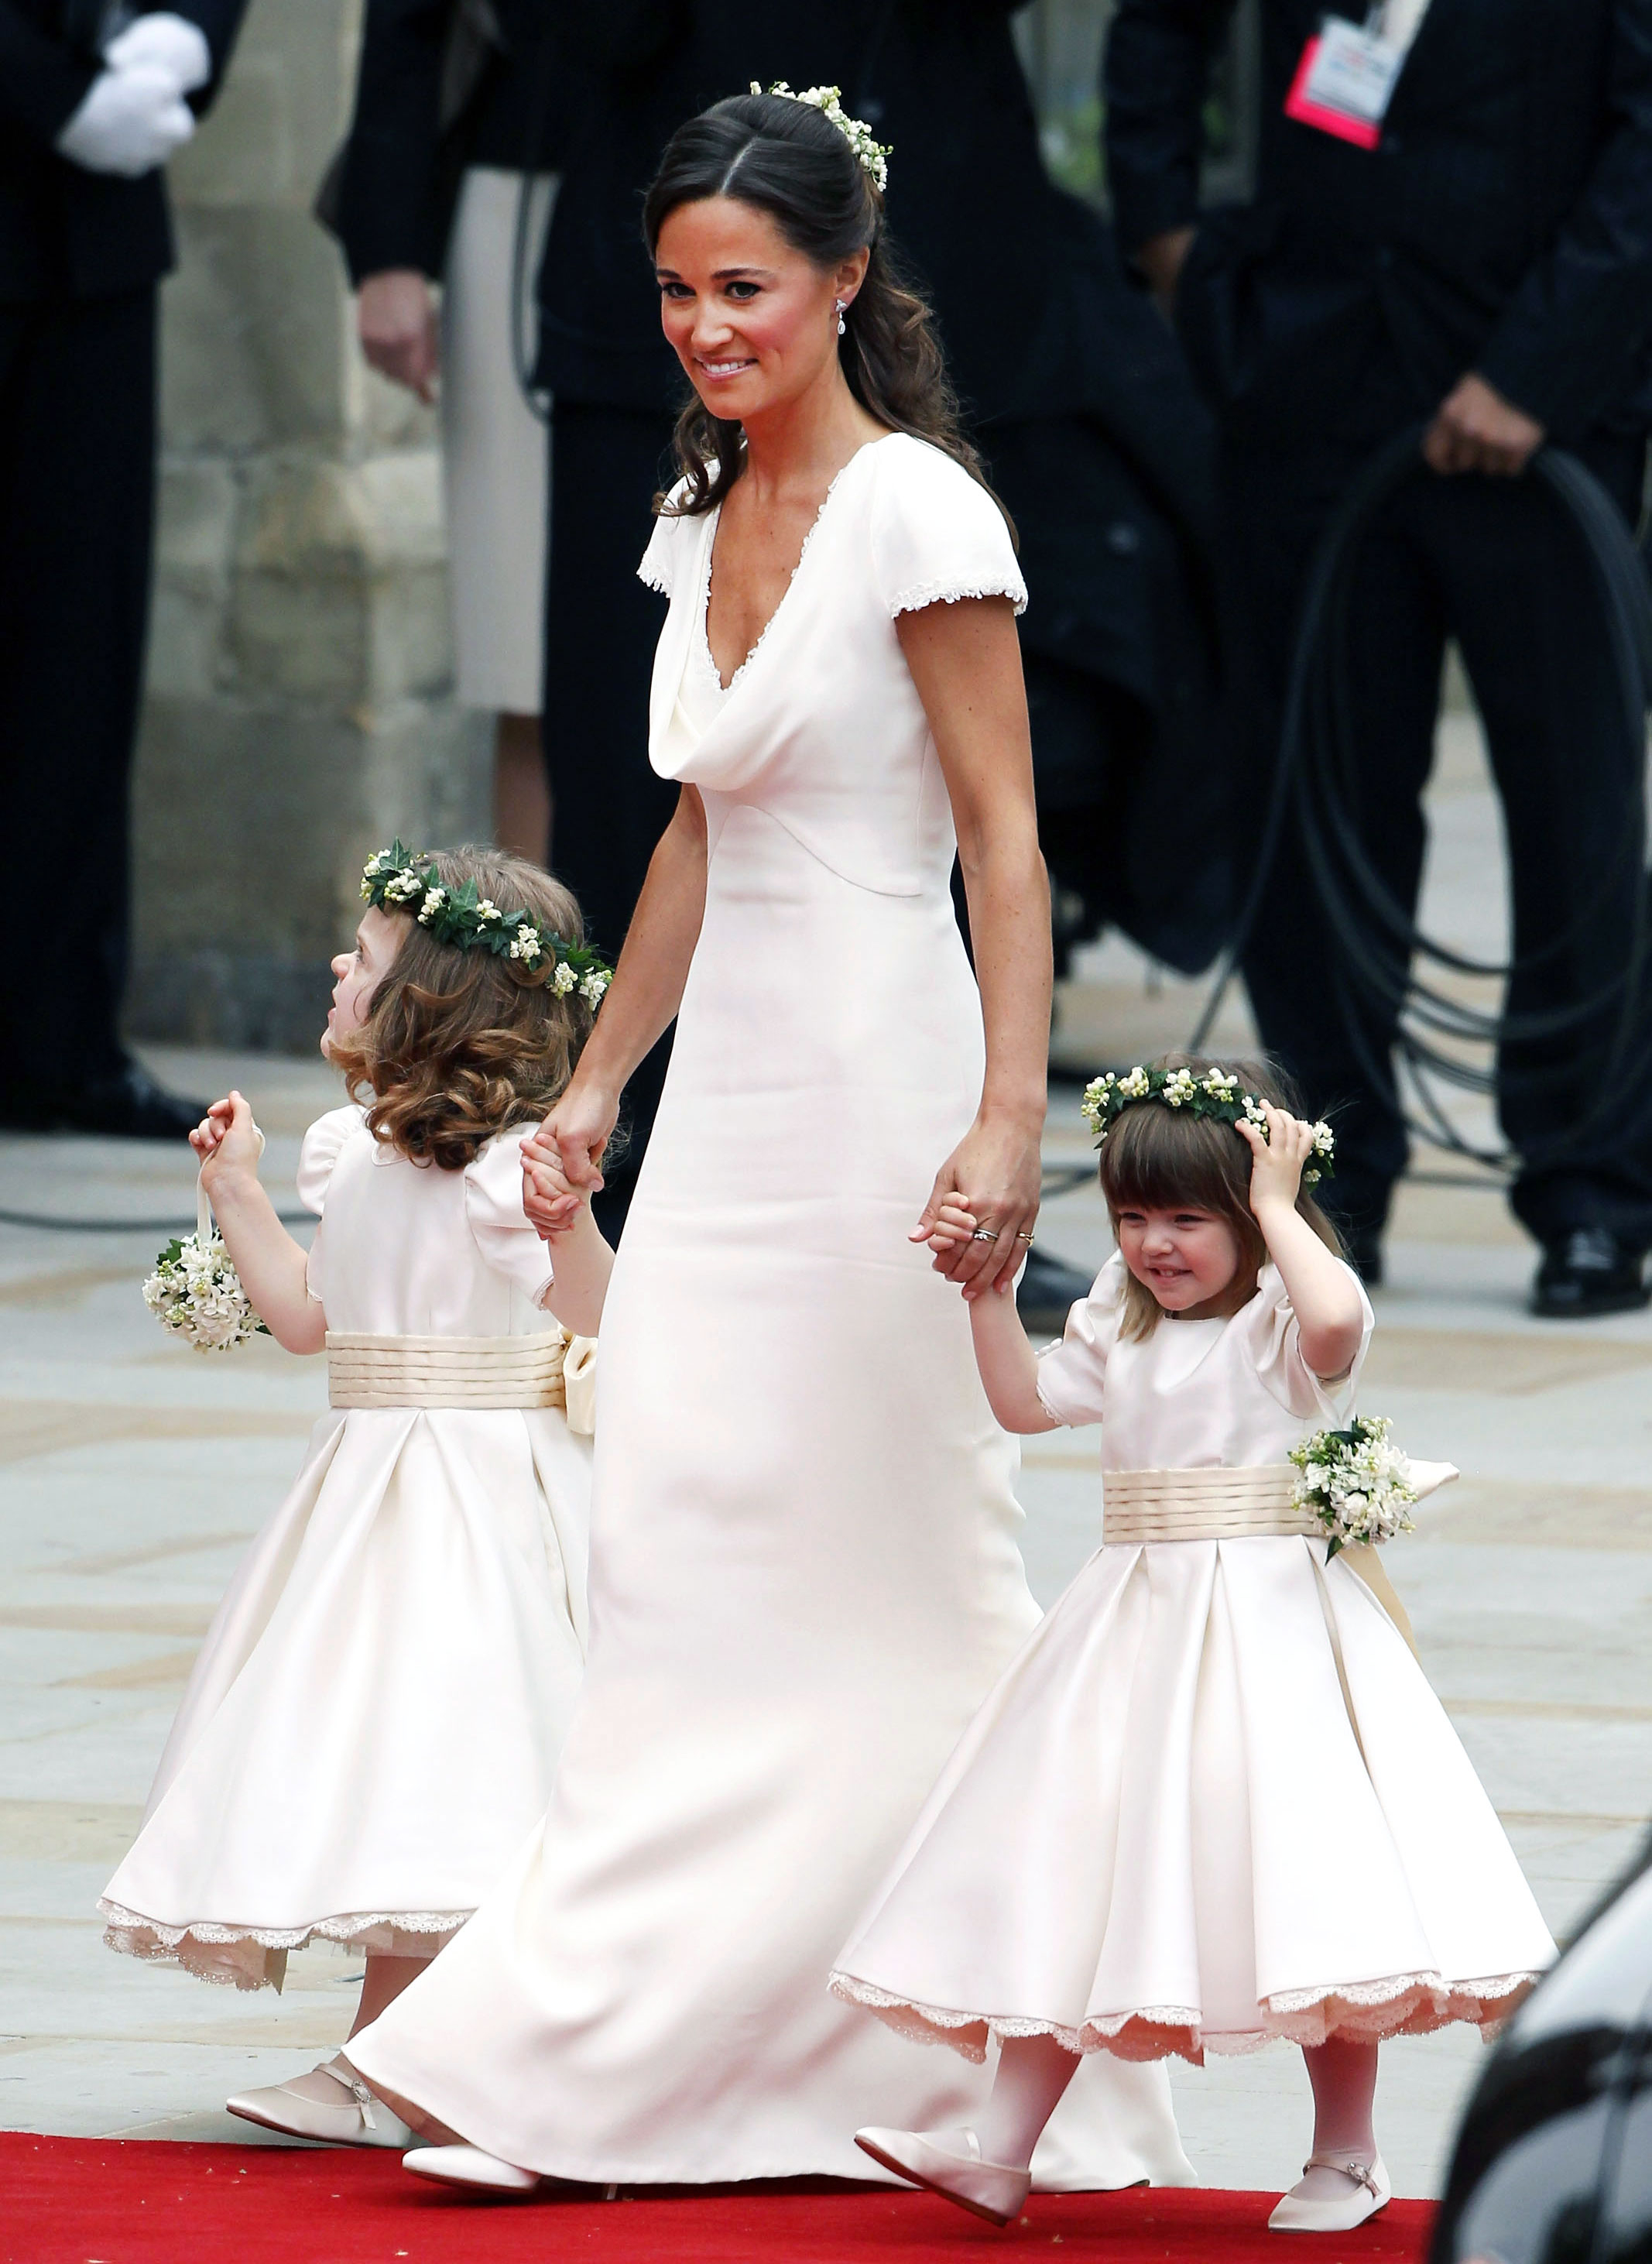 Pippa Middleton's Infamous Royal Wedding Bridesmaid Dress' Look-Alike Is  Now on Sale